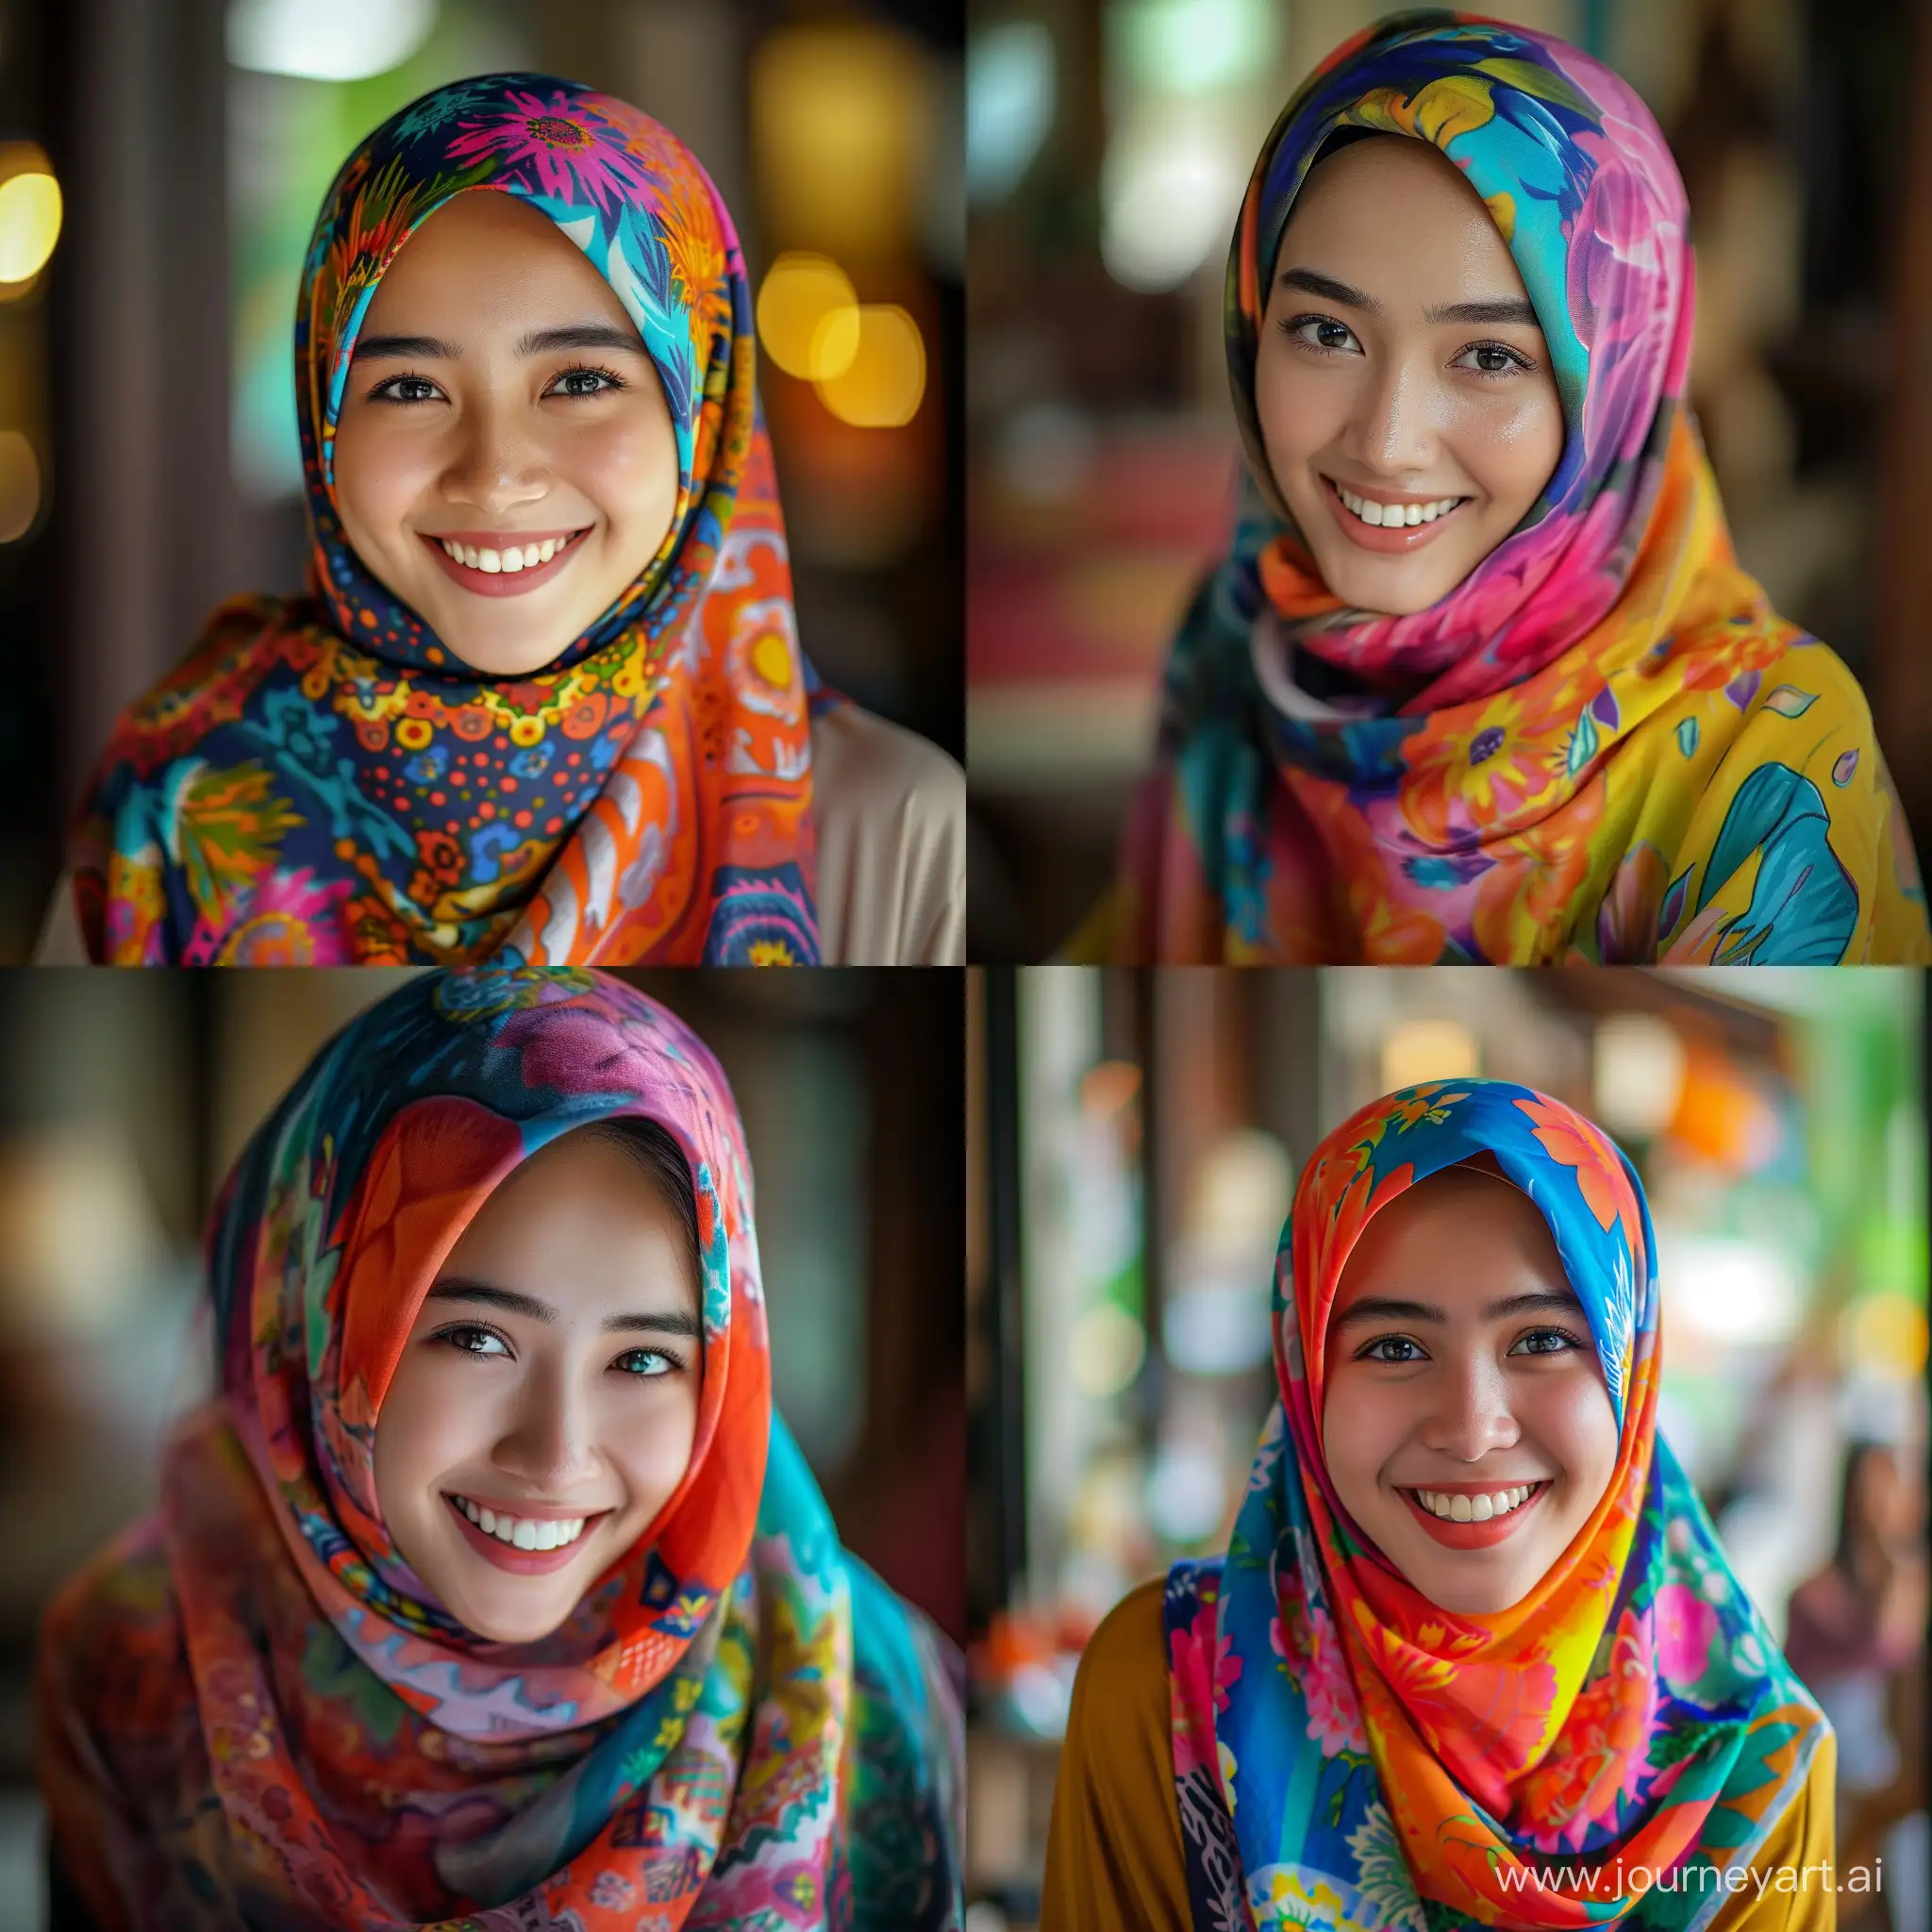 a young beautiful Indonesian woman, 19 years old, wearing a colorful hijab and smiling brightly, captured in high-definition detail, with a realistic and naturalistic style, emphasizing the vibrant colors of her hijab, expressive facial features, Canon EOS R5, 50mm f/1.8 lens, warm and inviting atmosphere